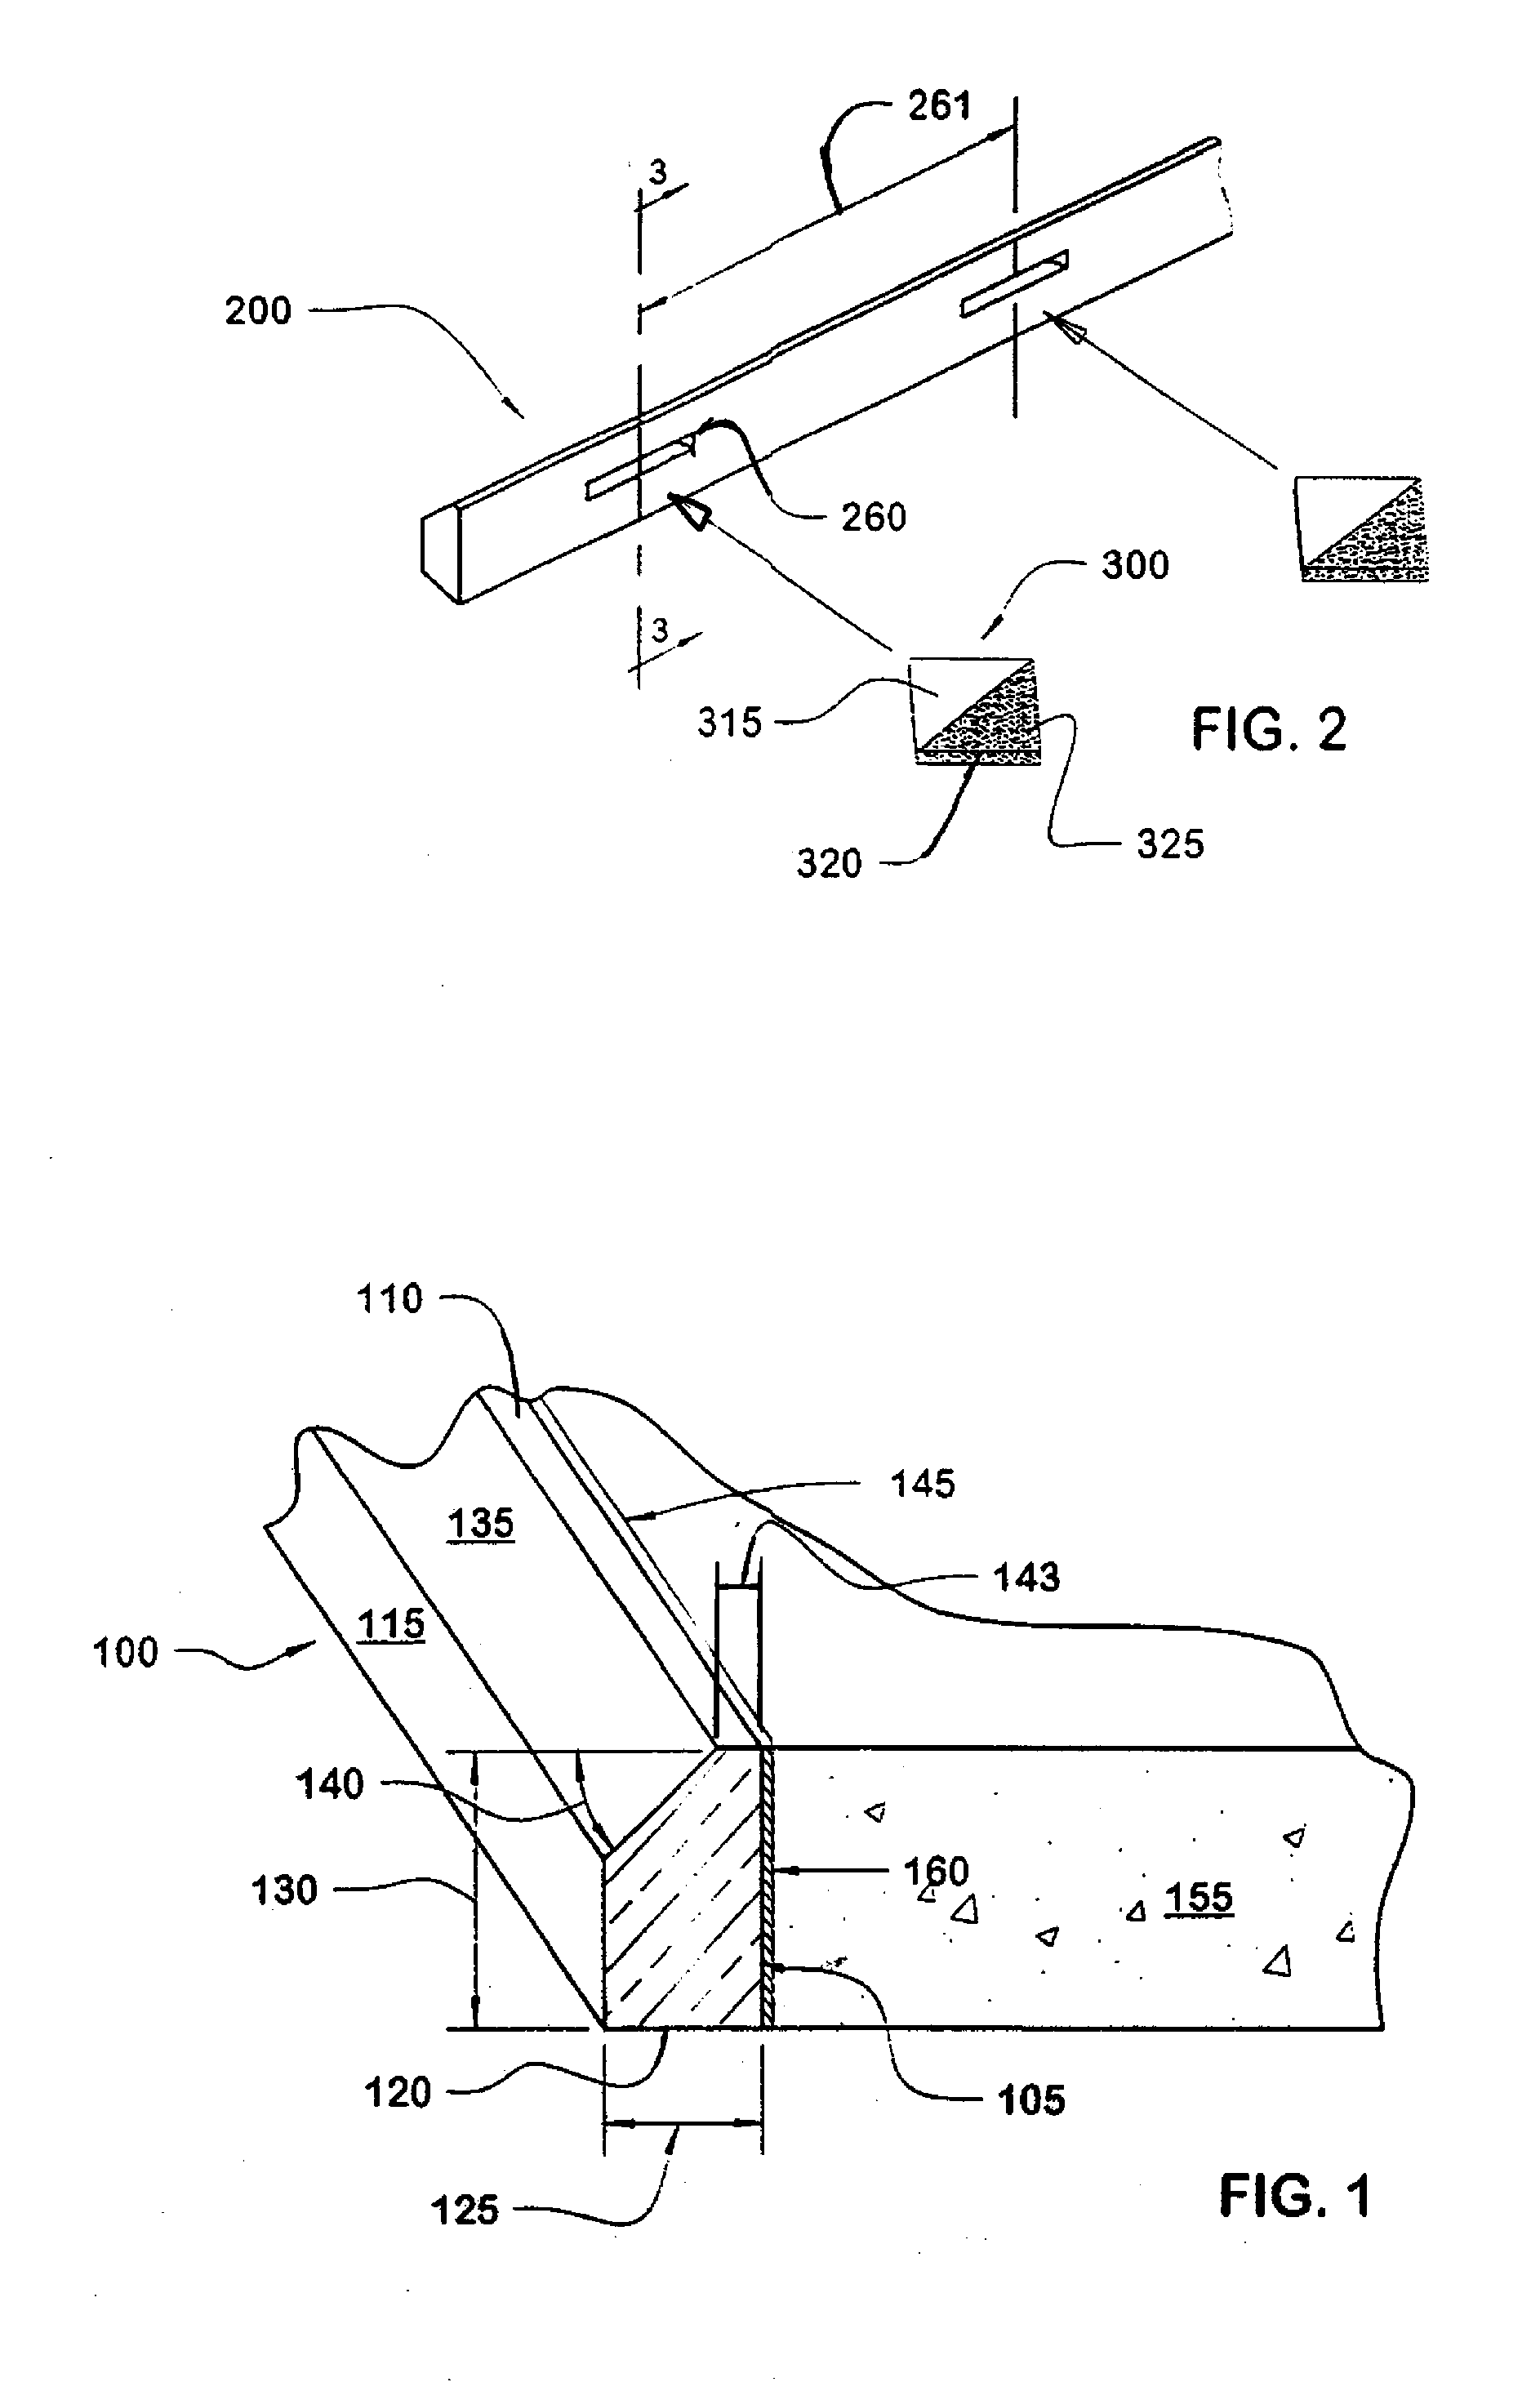 Apparatus for Forming Concrete and Transferring Loads Between Concrete Slabs